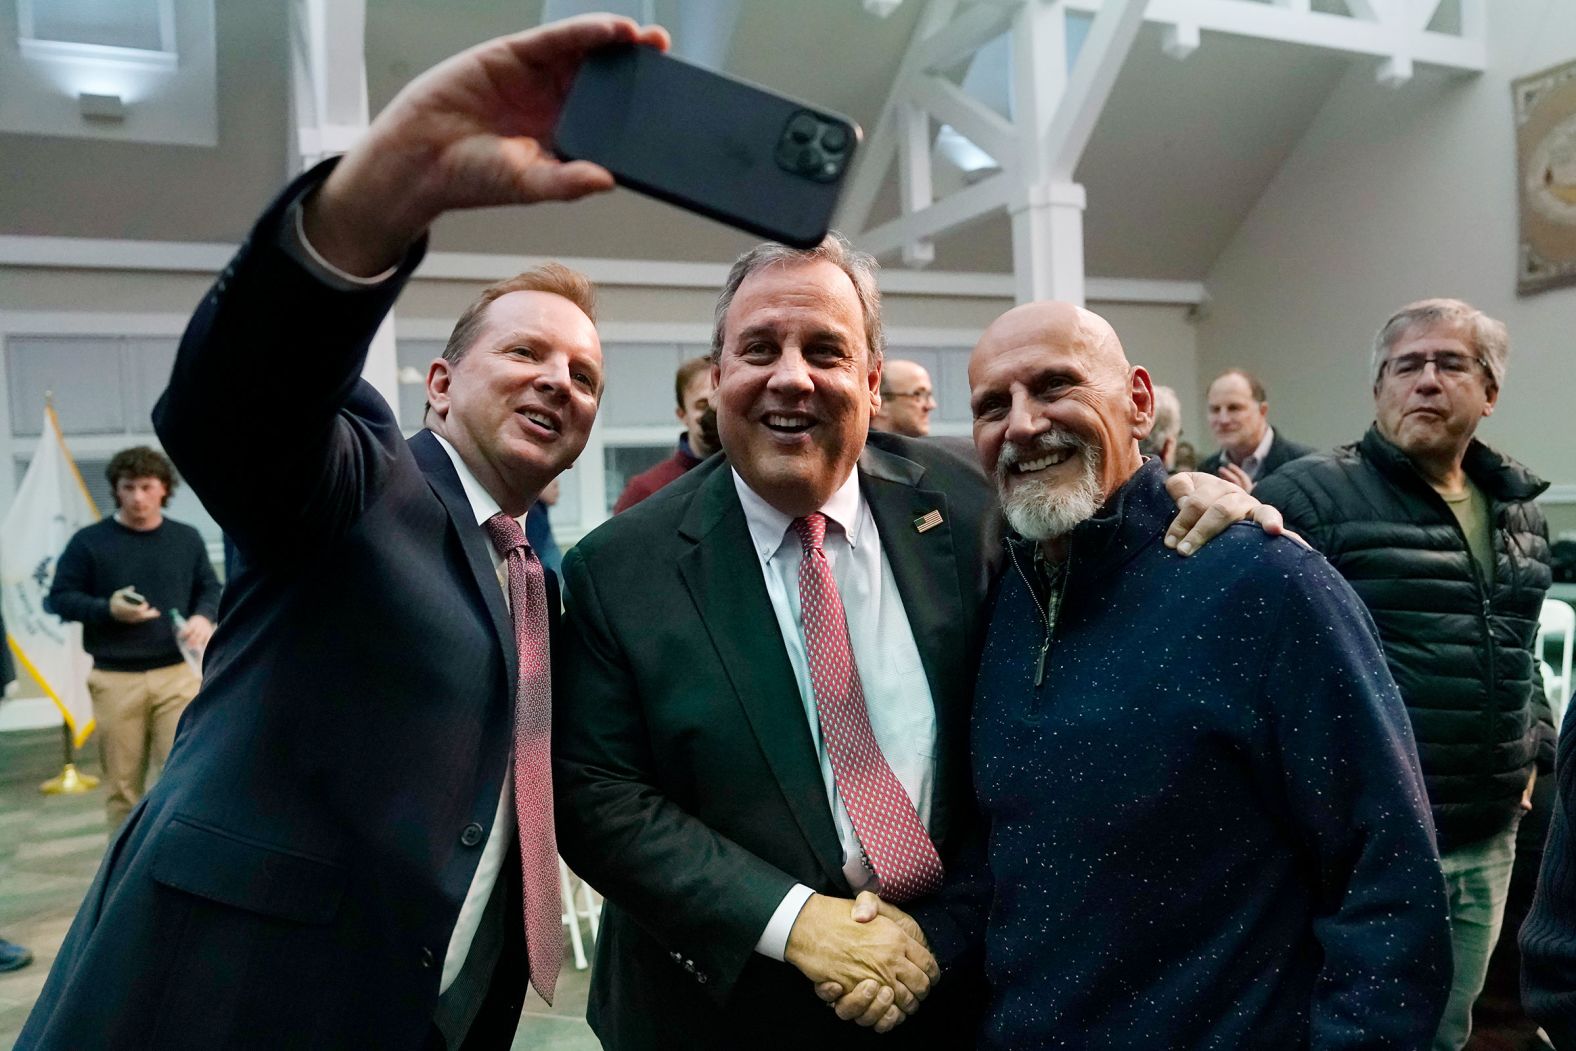 Christie poses for a selfie after a town hall-style meeting in Henniker, New Hampshire, in April 2023.